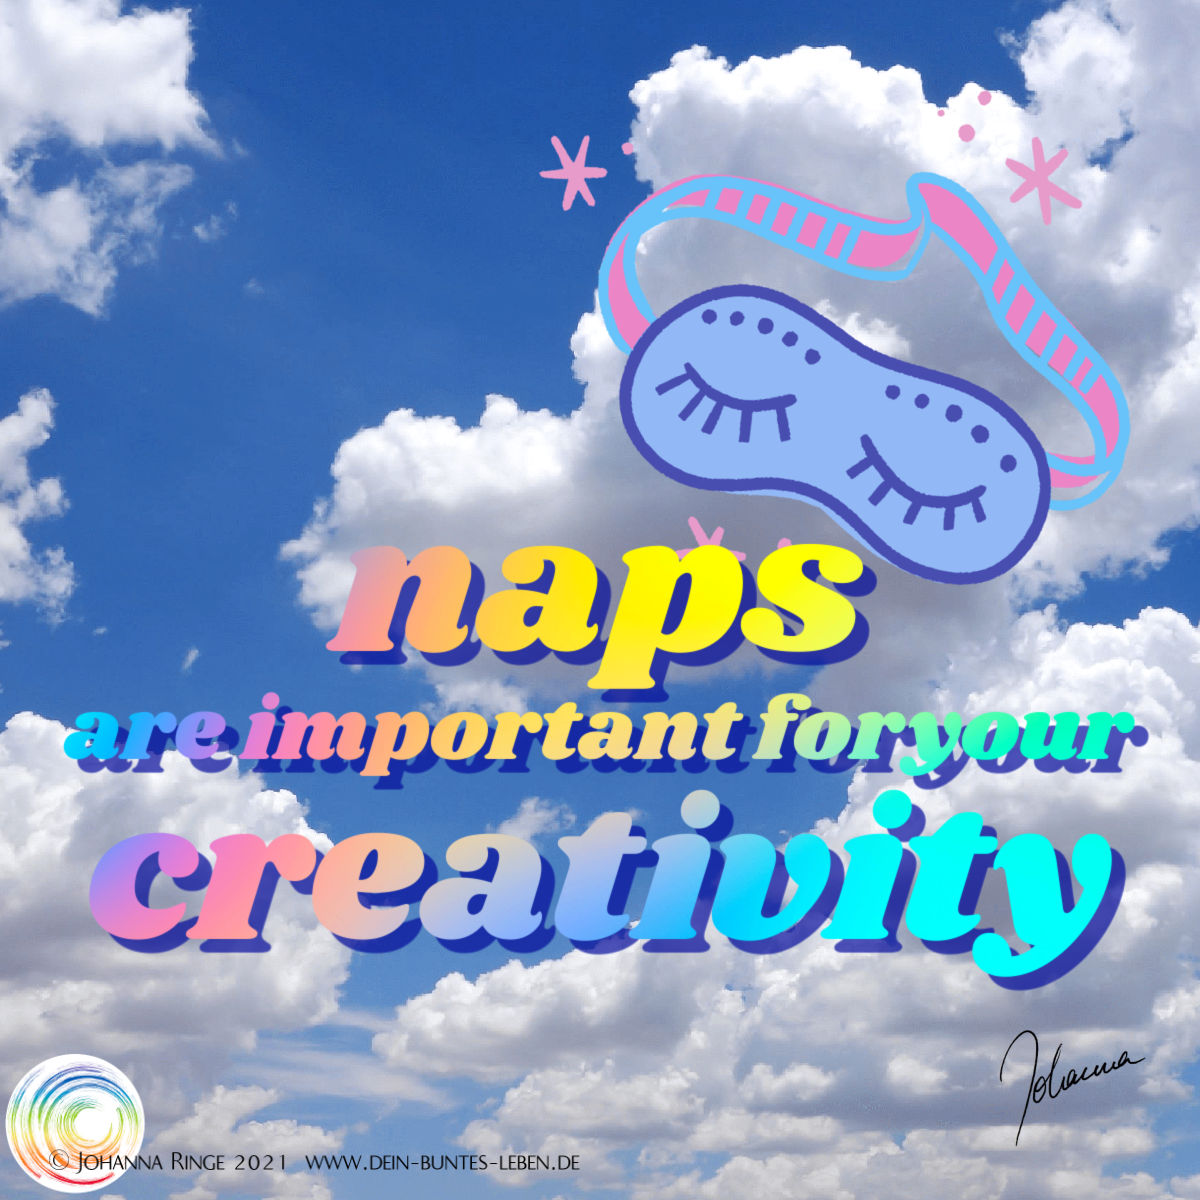 Naps are important for your creativity (text on picture of clouds with a flying sleepmask) ©Johanna Ringe 2021 www.johannaringe.com